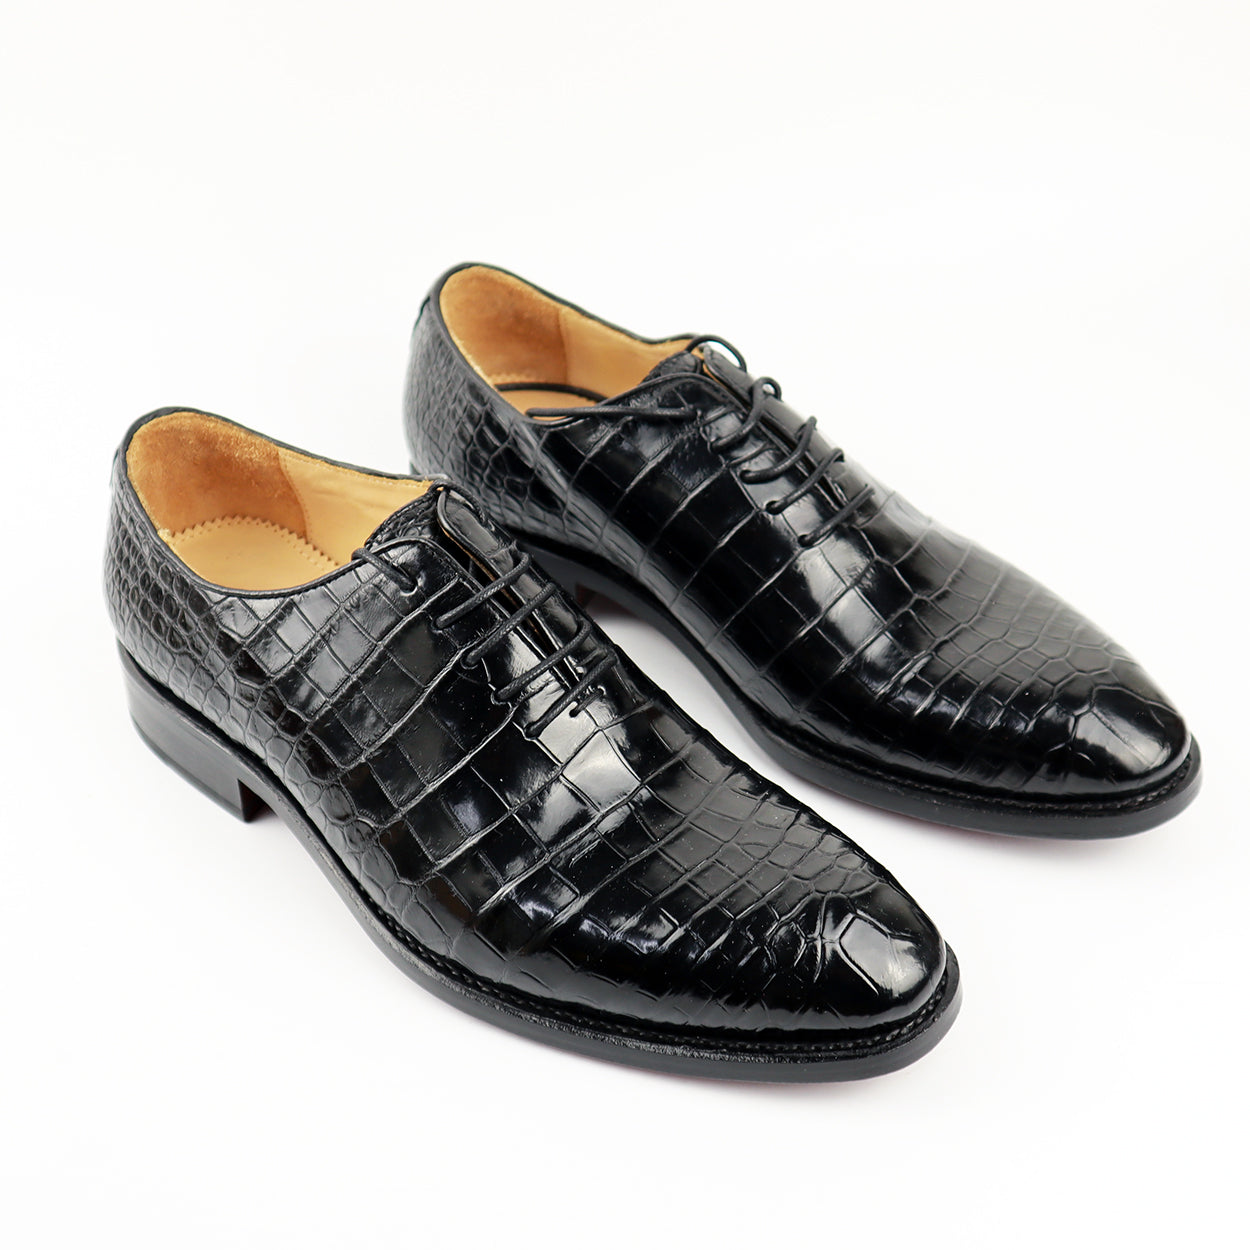 Source Goodyear welt Alligator low cut shoes for men fashion